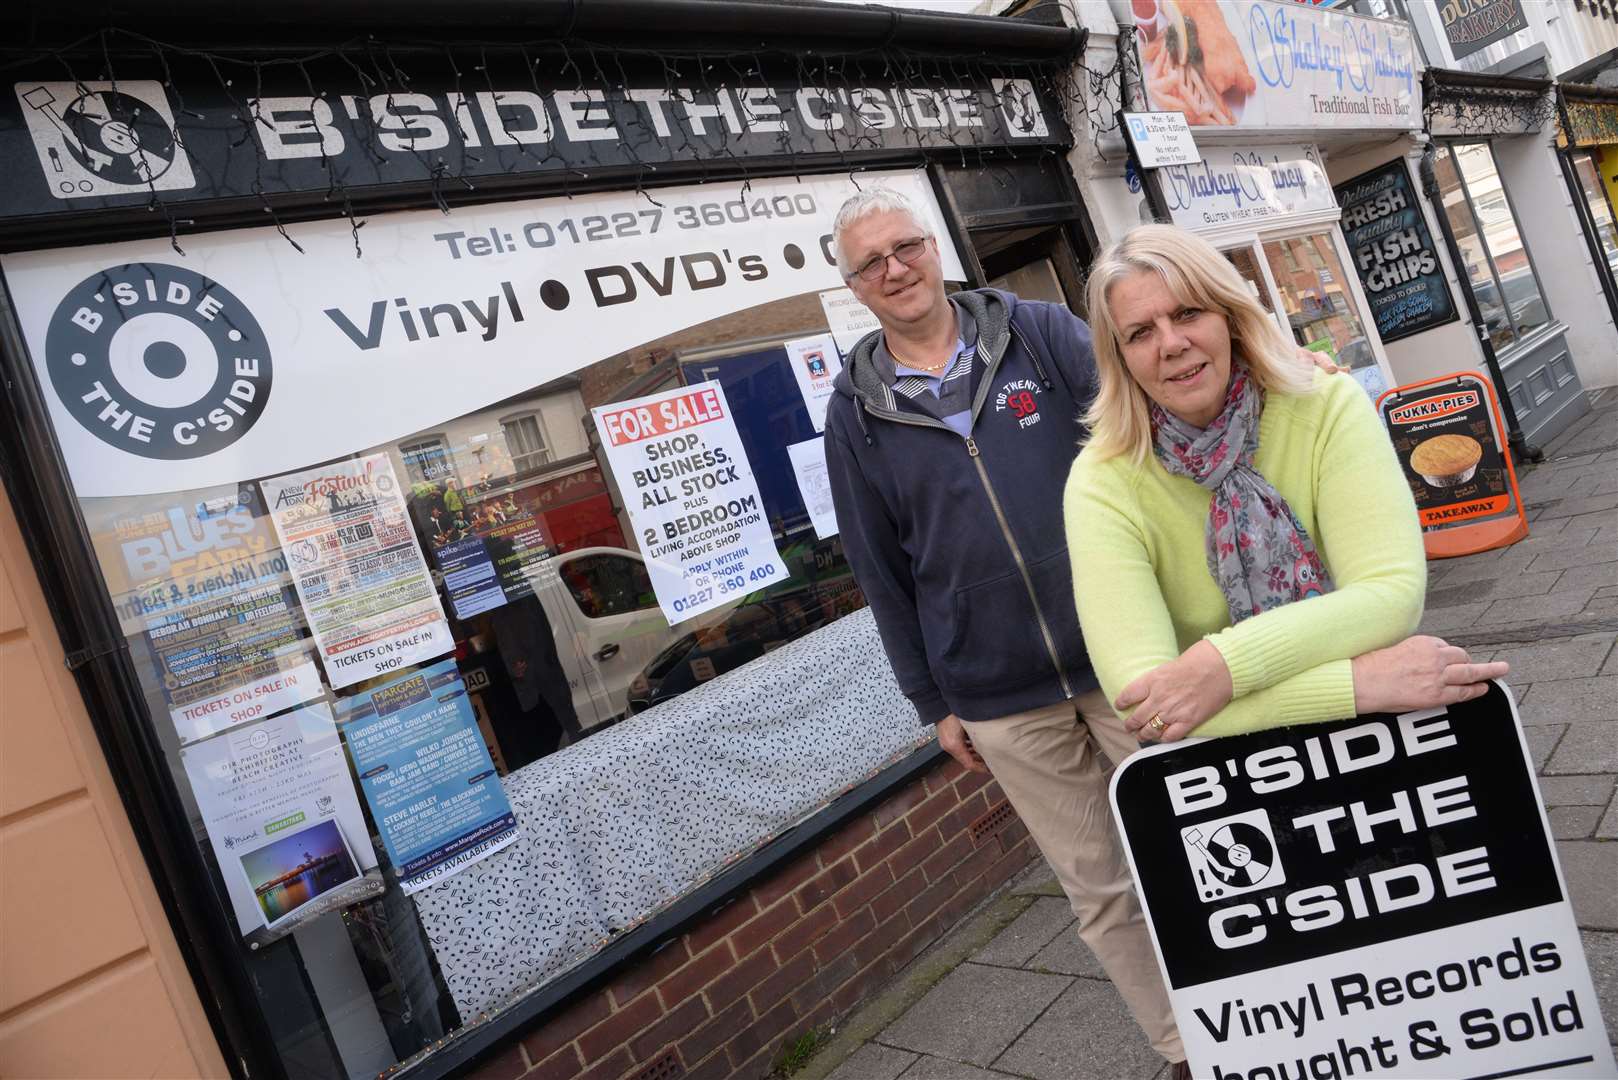 Oz and Chris Eastman at B'side the C'side in Herne Bay High Street. Picture: Chris Davey